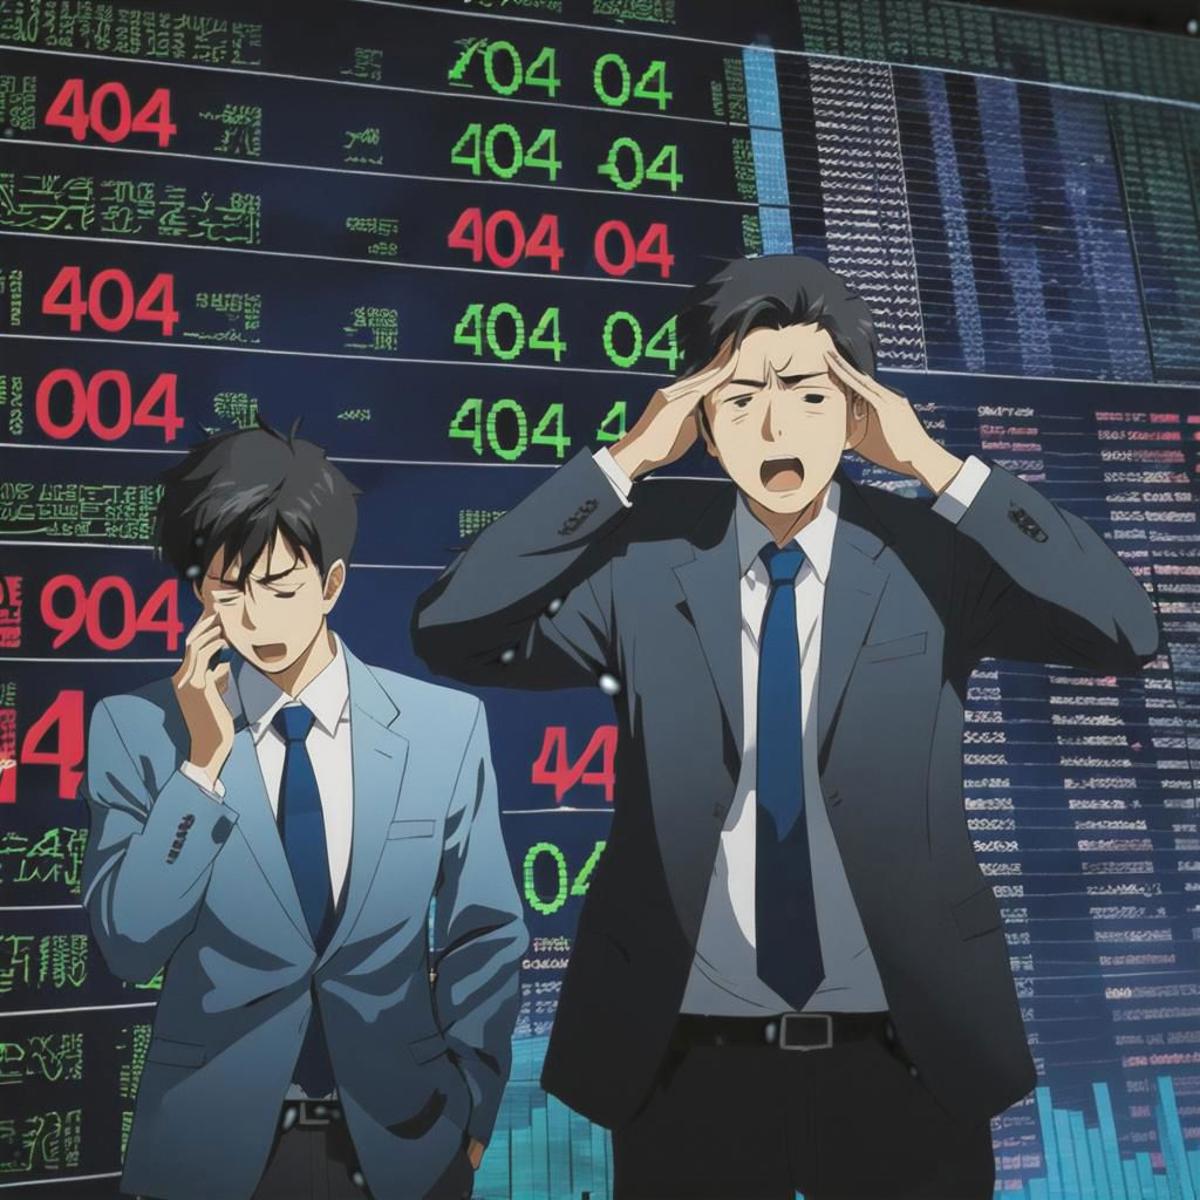 Two men in suits looking at a computer screen with stock market data.